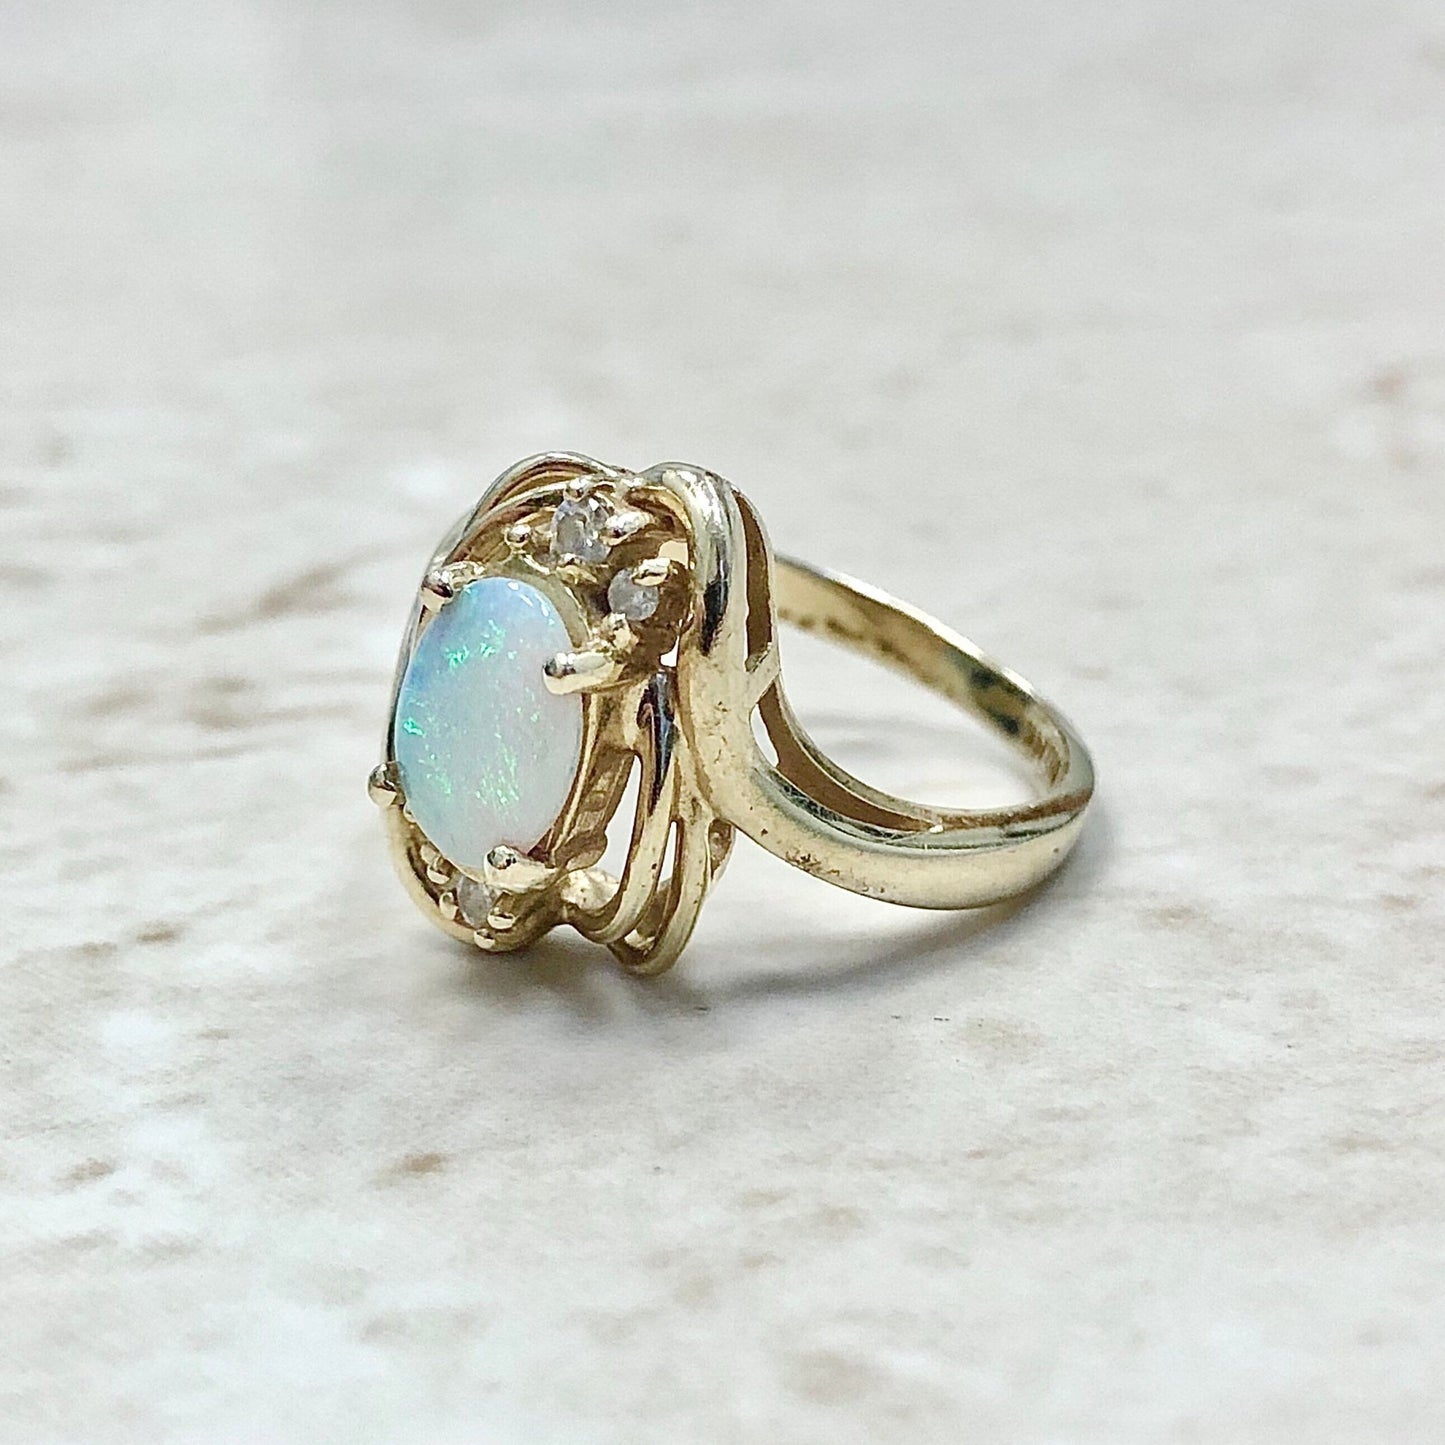 Fine Vintage Natural Opal And Diamond Ring - 14 Karat Yellow Gold - October Birthstone - Birthday Gift - Best Gifts For Her - Size 6.25 US